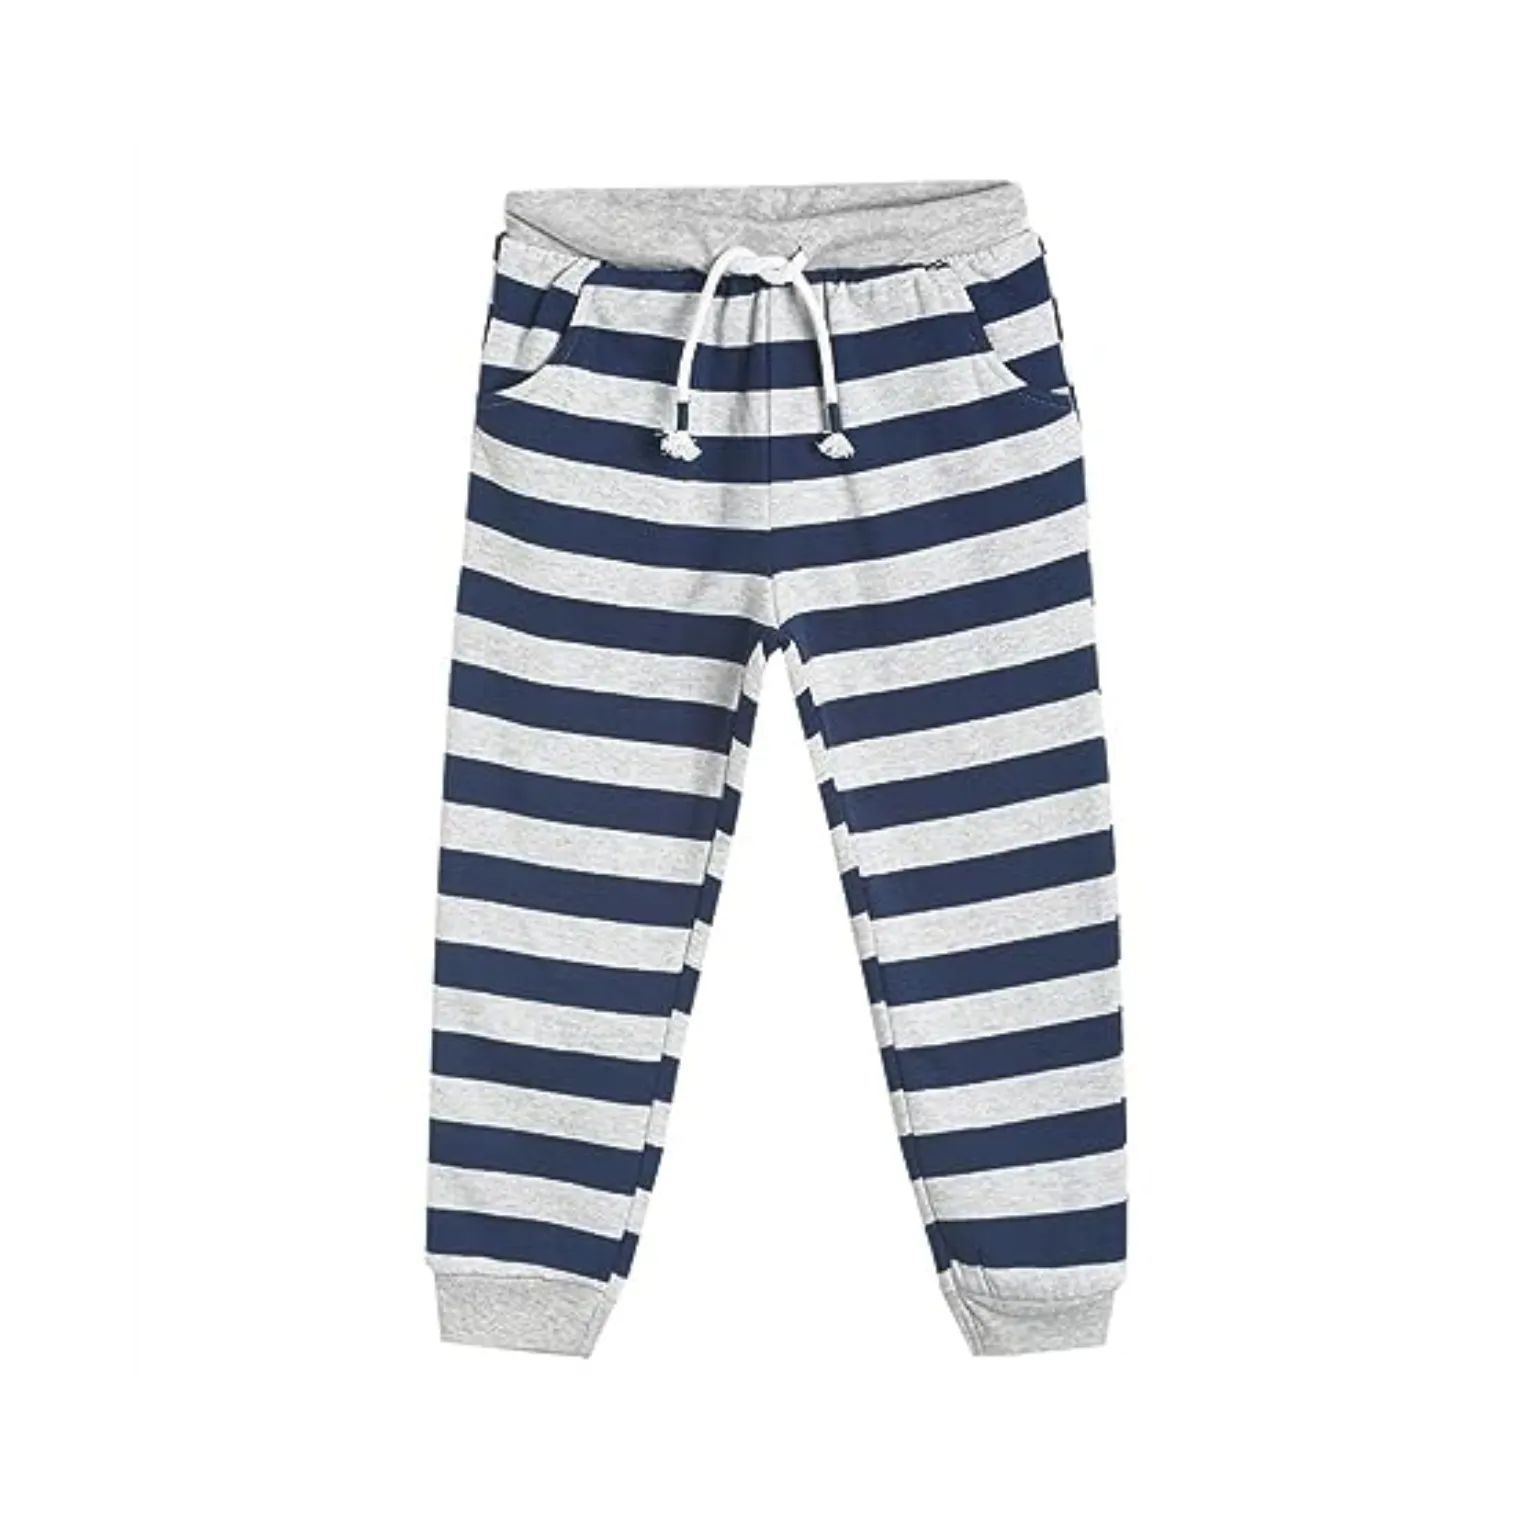 Striped Jogging Trouser manufacturing with competitive prices